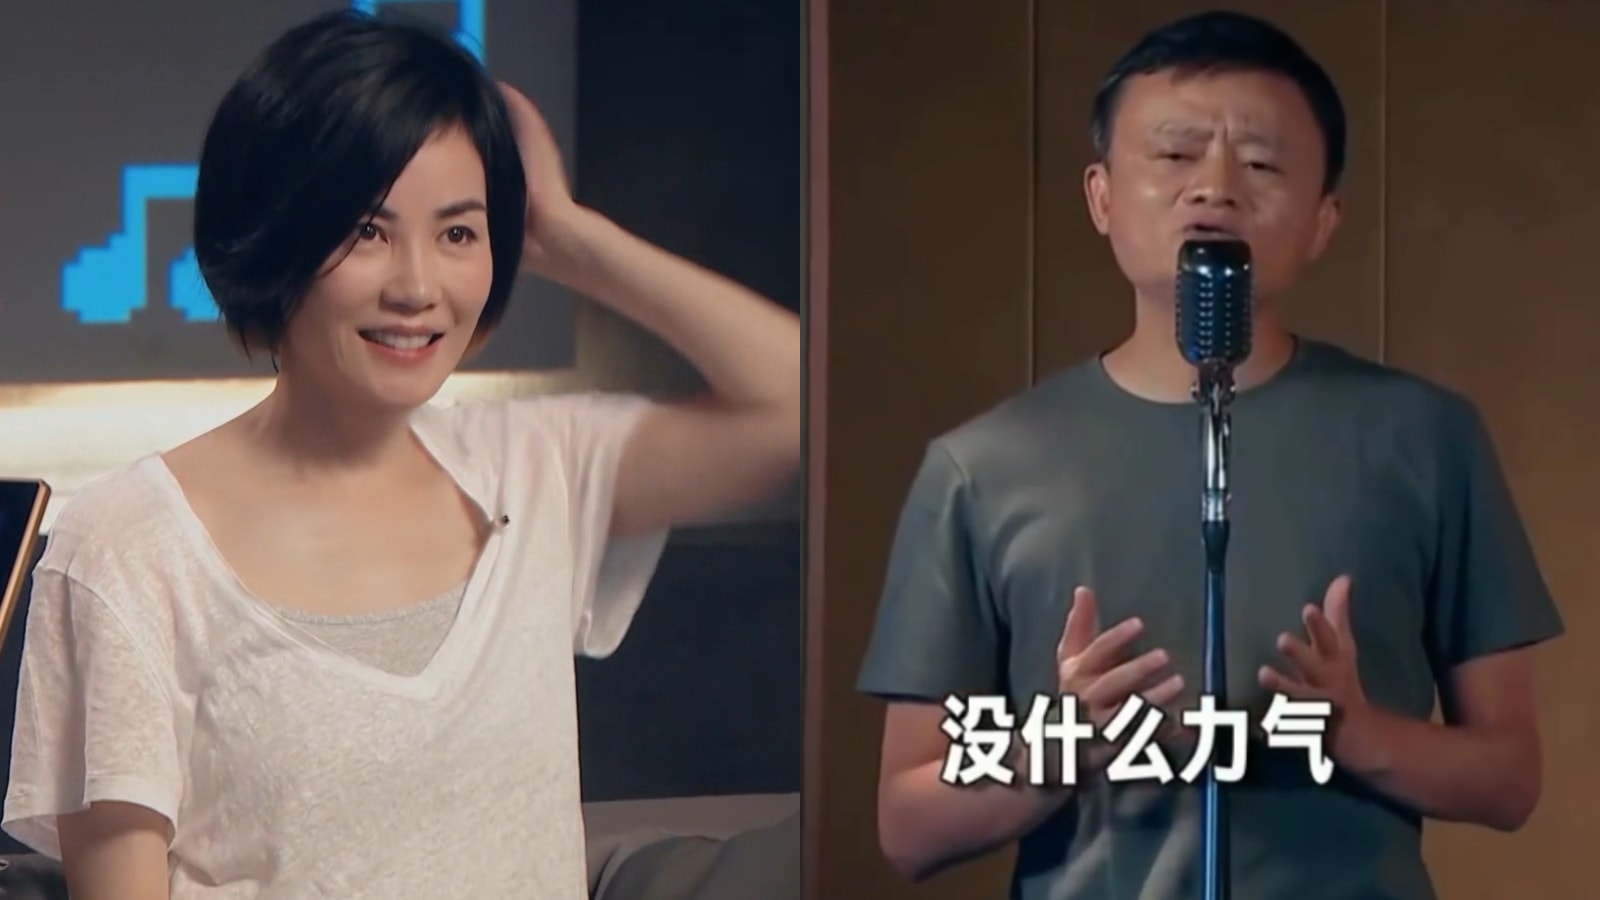 Faye Wong & Alibaba Founder Jack Ma Live Streamed Their Karaoke Duet; Added The Word ‘Taobao’ Into The Song